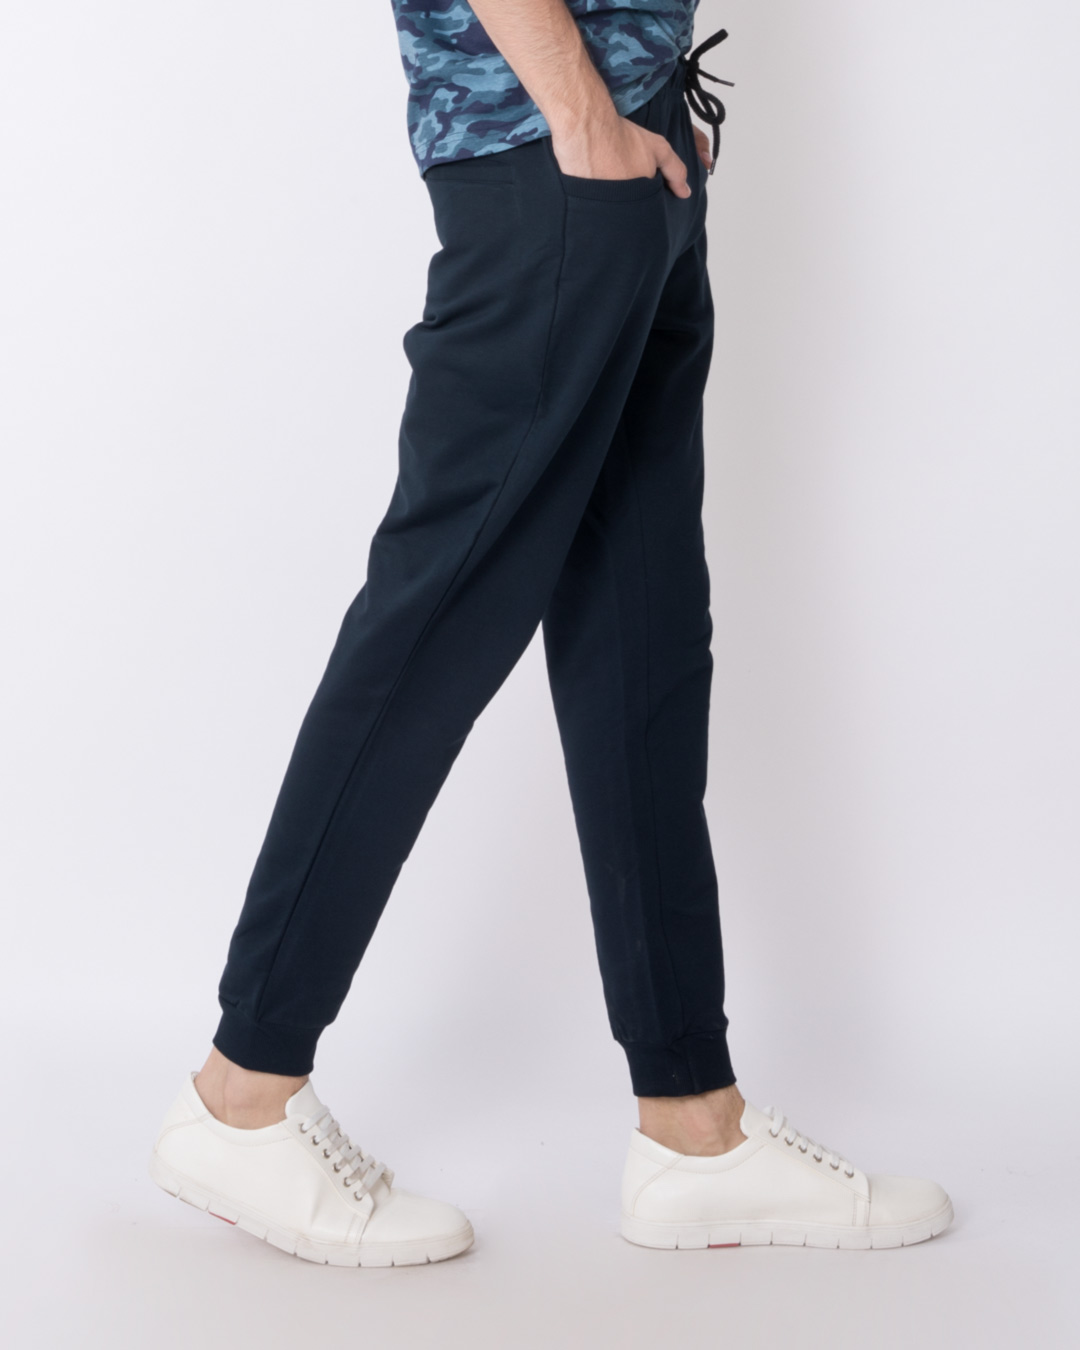 Sweet Dreams Men Peacock Blue Polyester Solid Track Pants